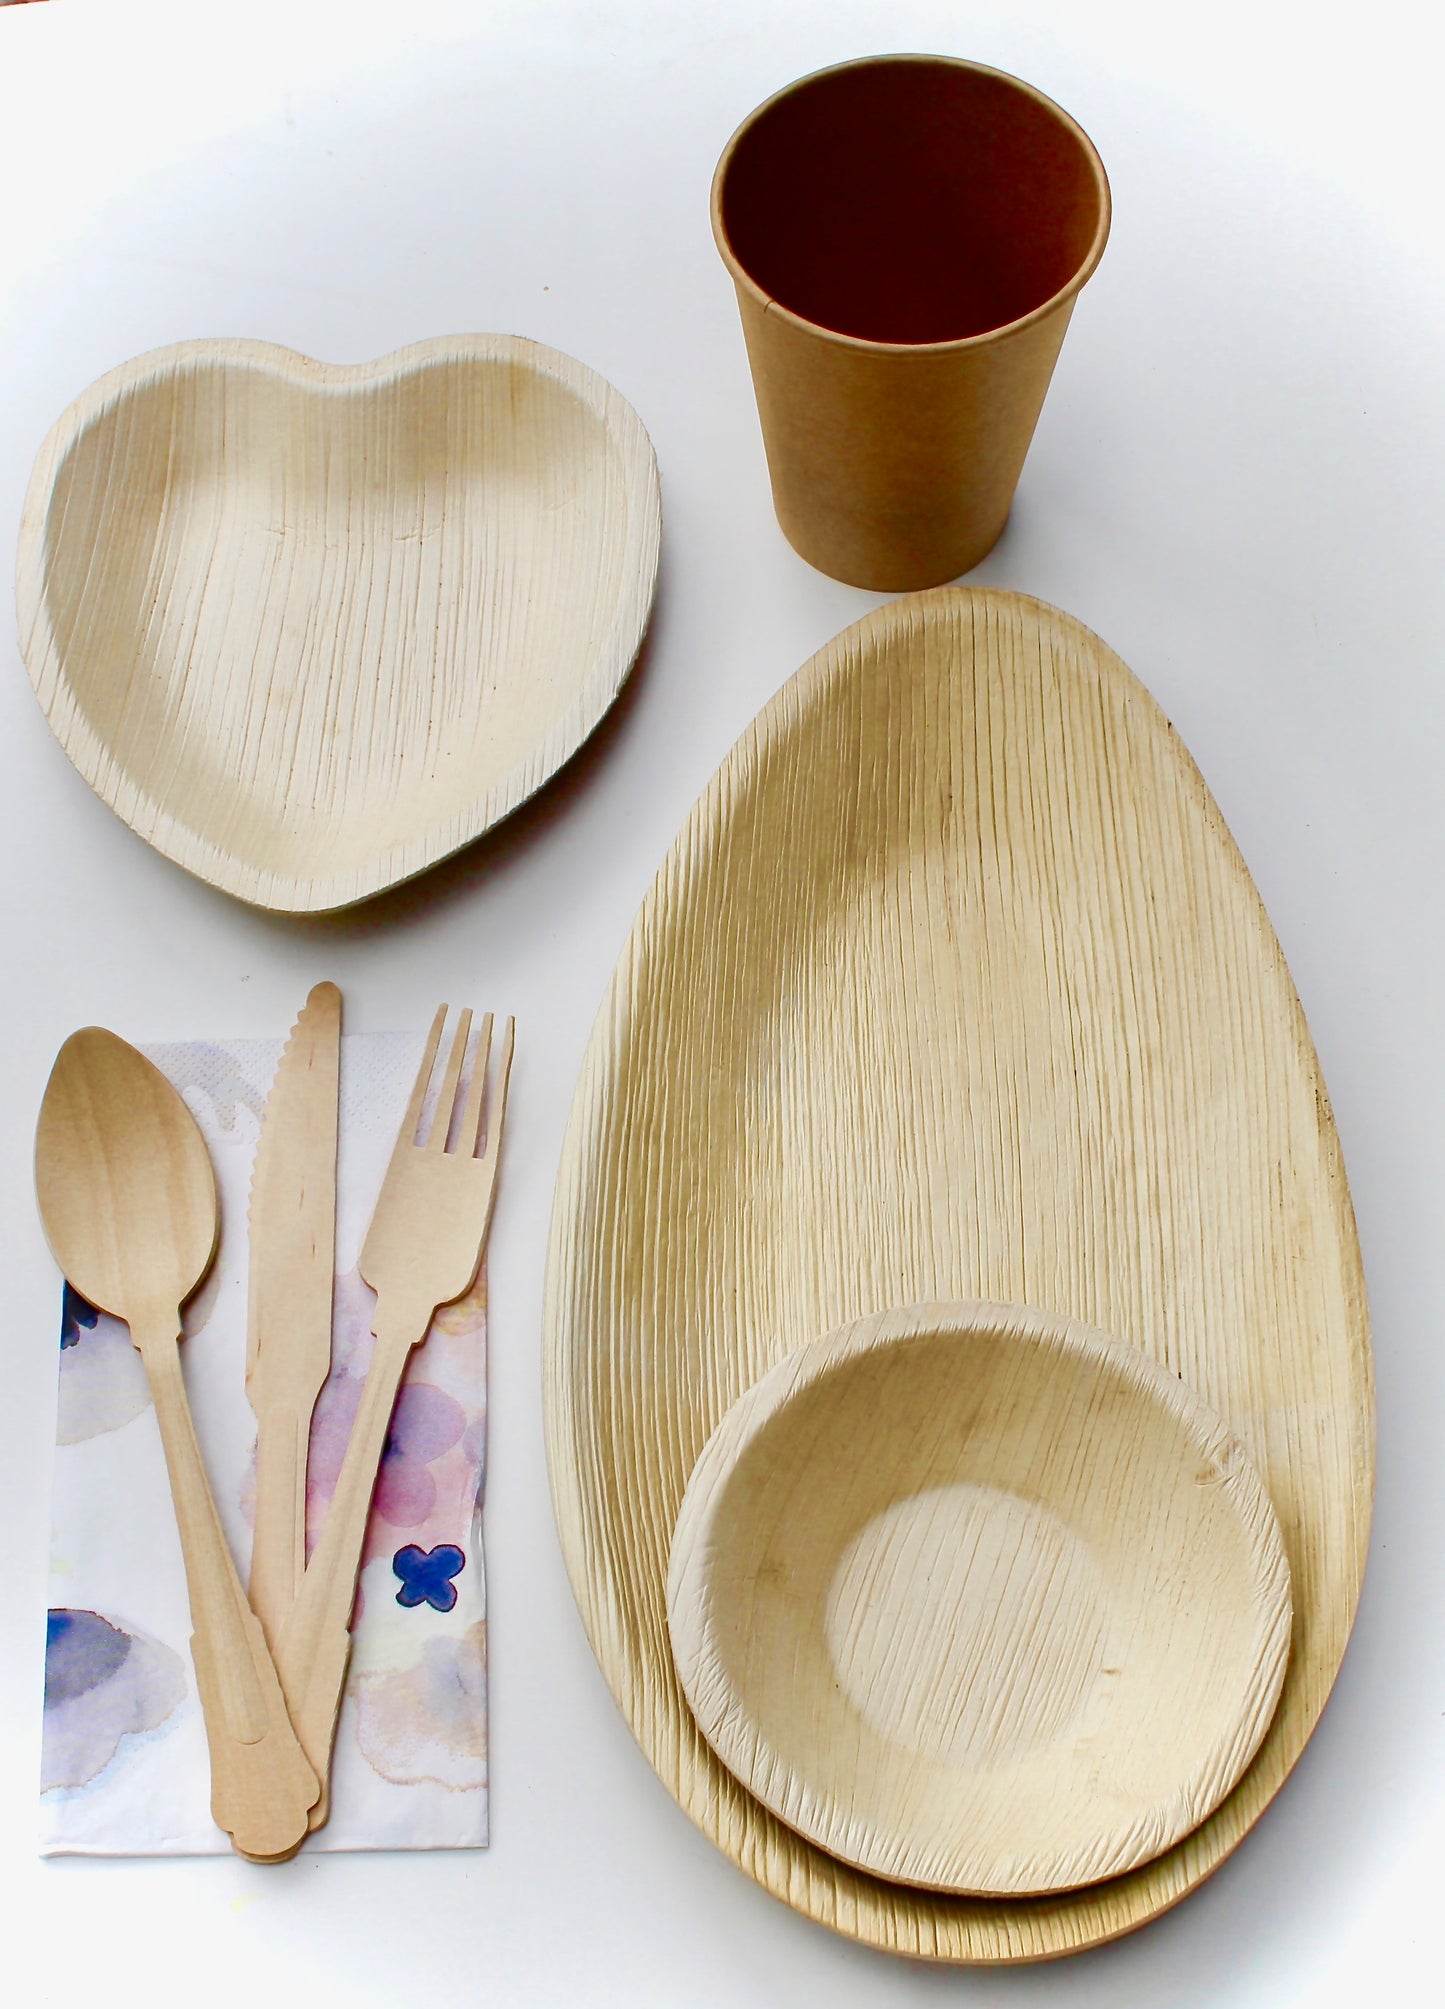 Palm Leaf plates 10 Pice 10" Square Deep   - 10 pic 6" Heart 6"  - 30 Pic cutlery - 10 pic 5" Bowl  and 10 pic Coup - 20 pic Napkin